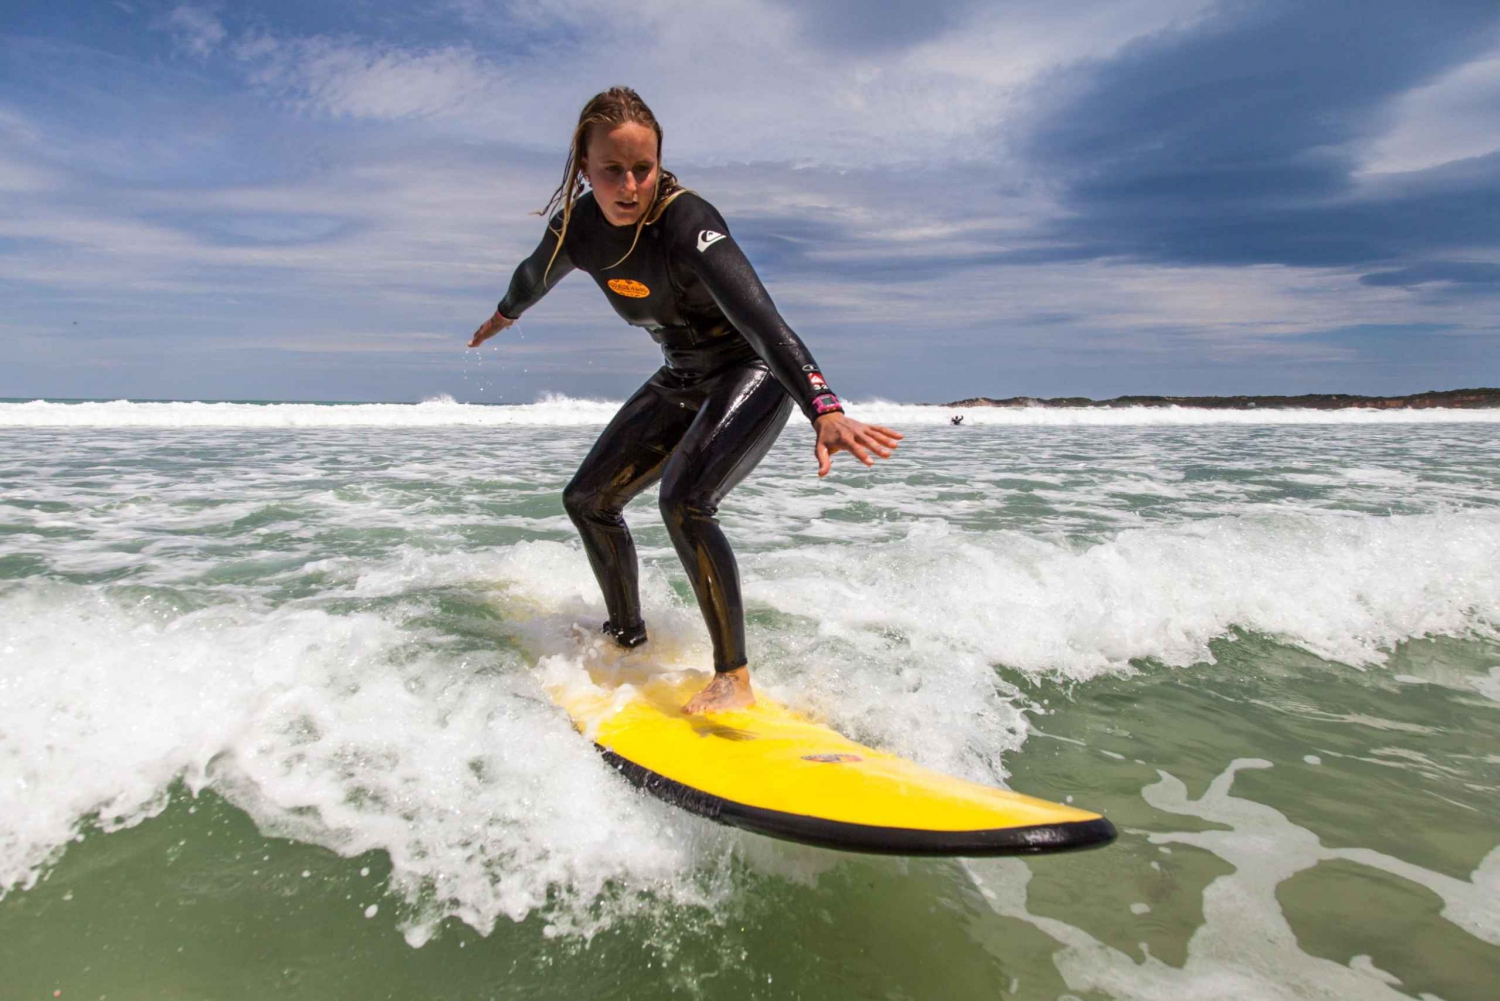 Anglesea: 2-Hour Surf Lesson on the Great Ocean Road